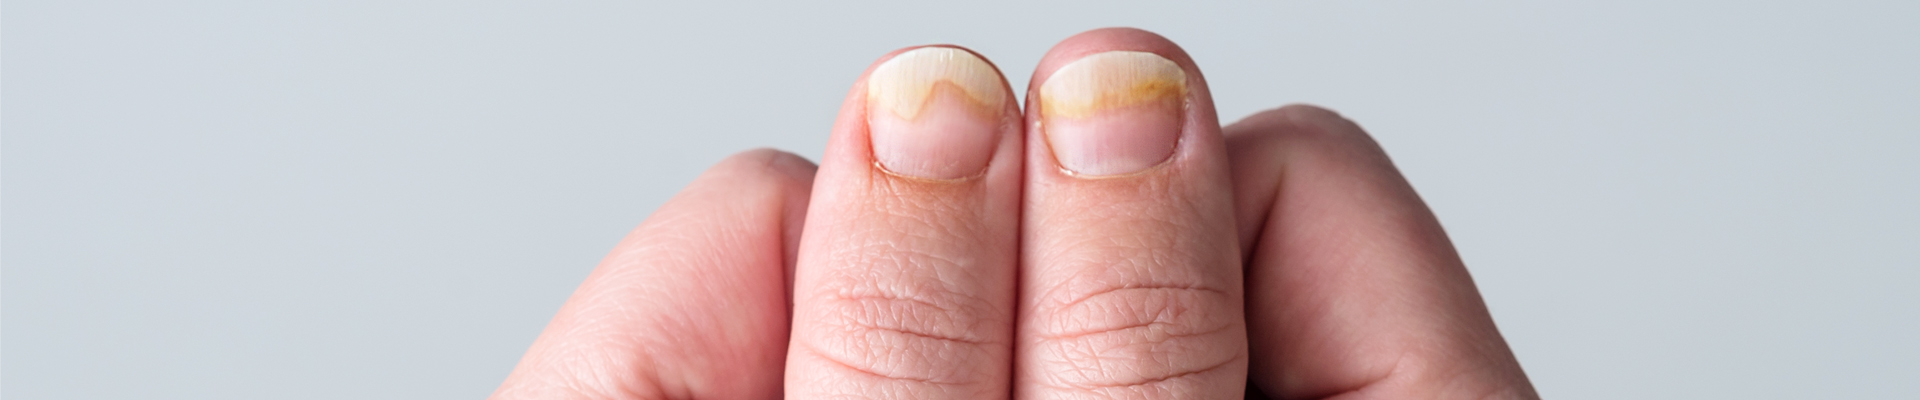 Brittle Nails | Causes and How to Care For Them